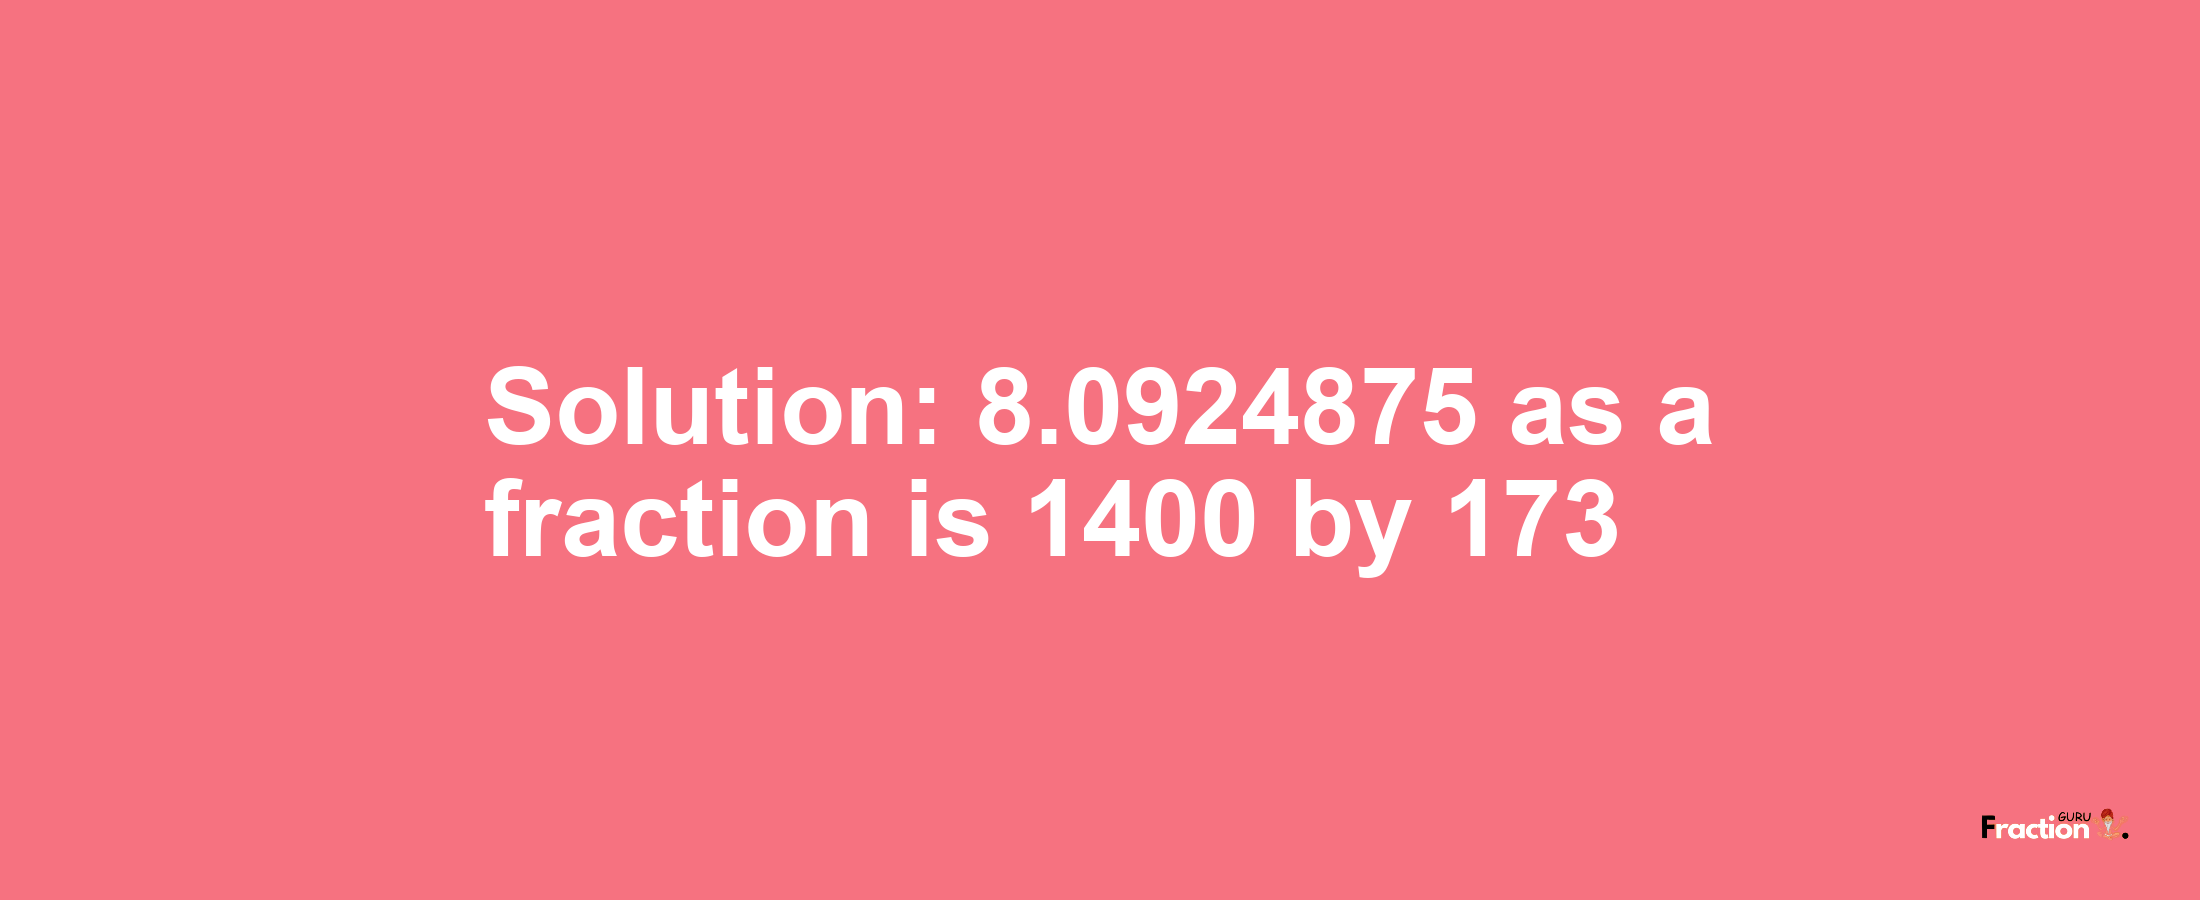 Solution:8.0924875 as a fraction is 1400/173